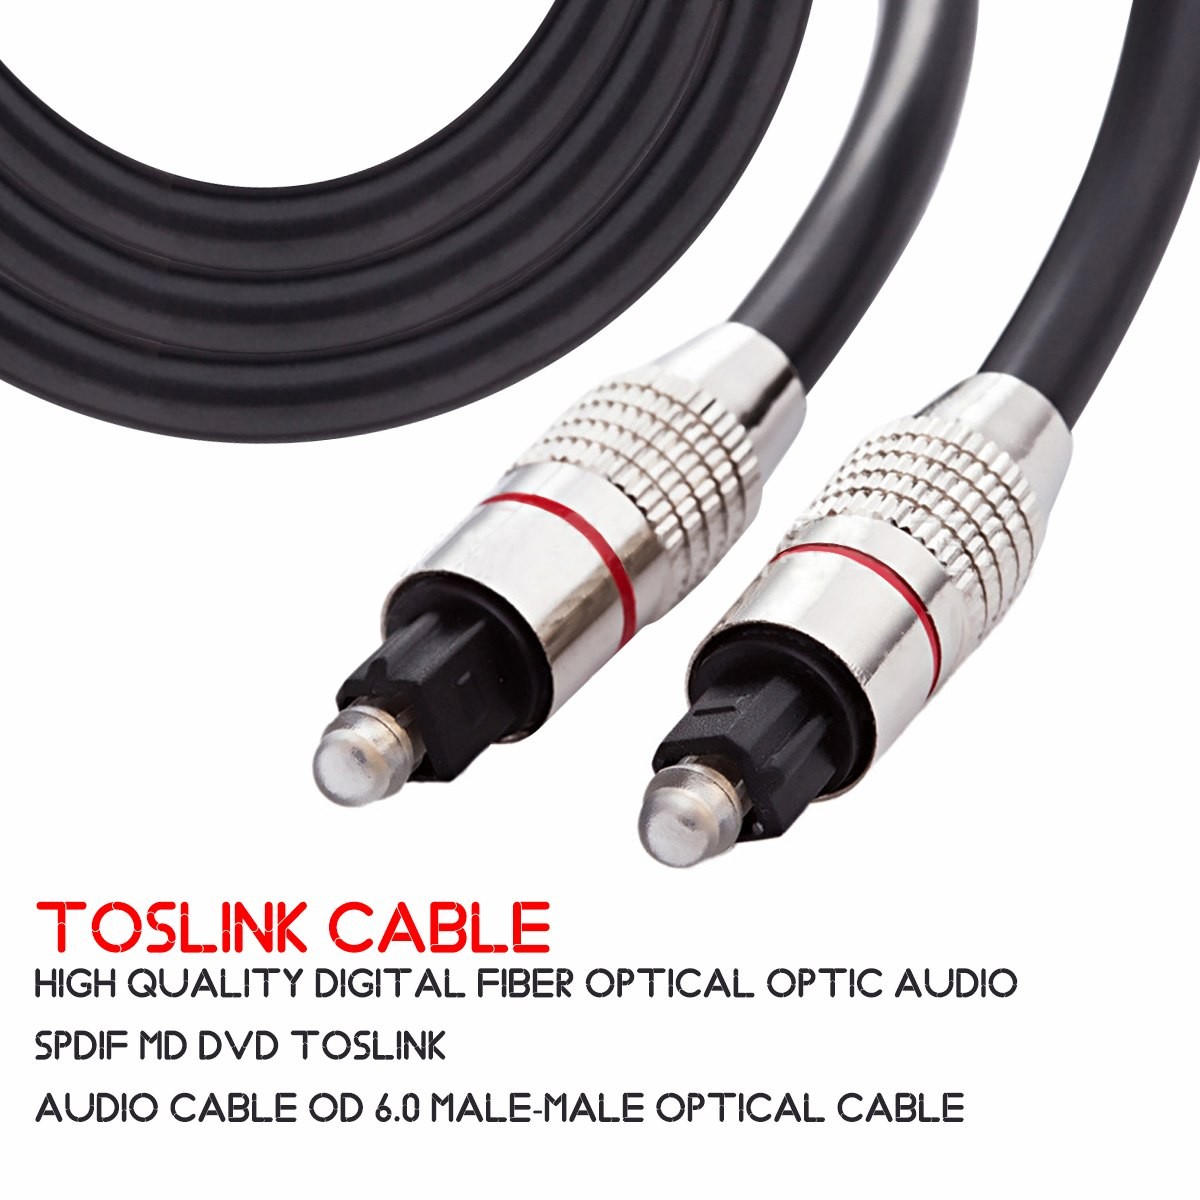 VOXLINK Digital OD 6 0 Gold plated Audio Optical SPDIF cable Toslink Fiber cable for Blu ray CD DVD player Xbox 360 PS3 in Audio & Video Cables from